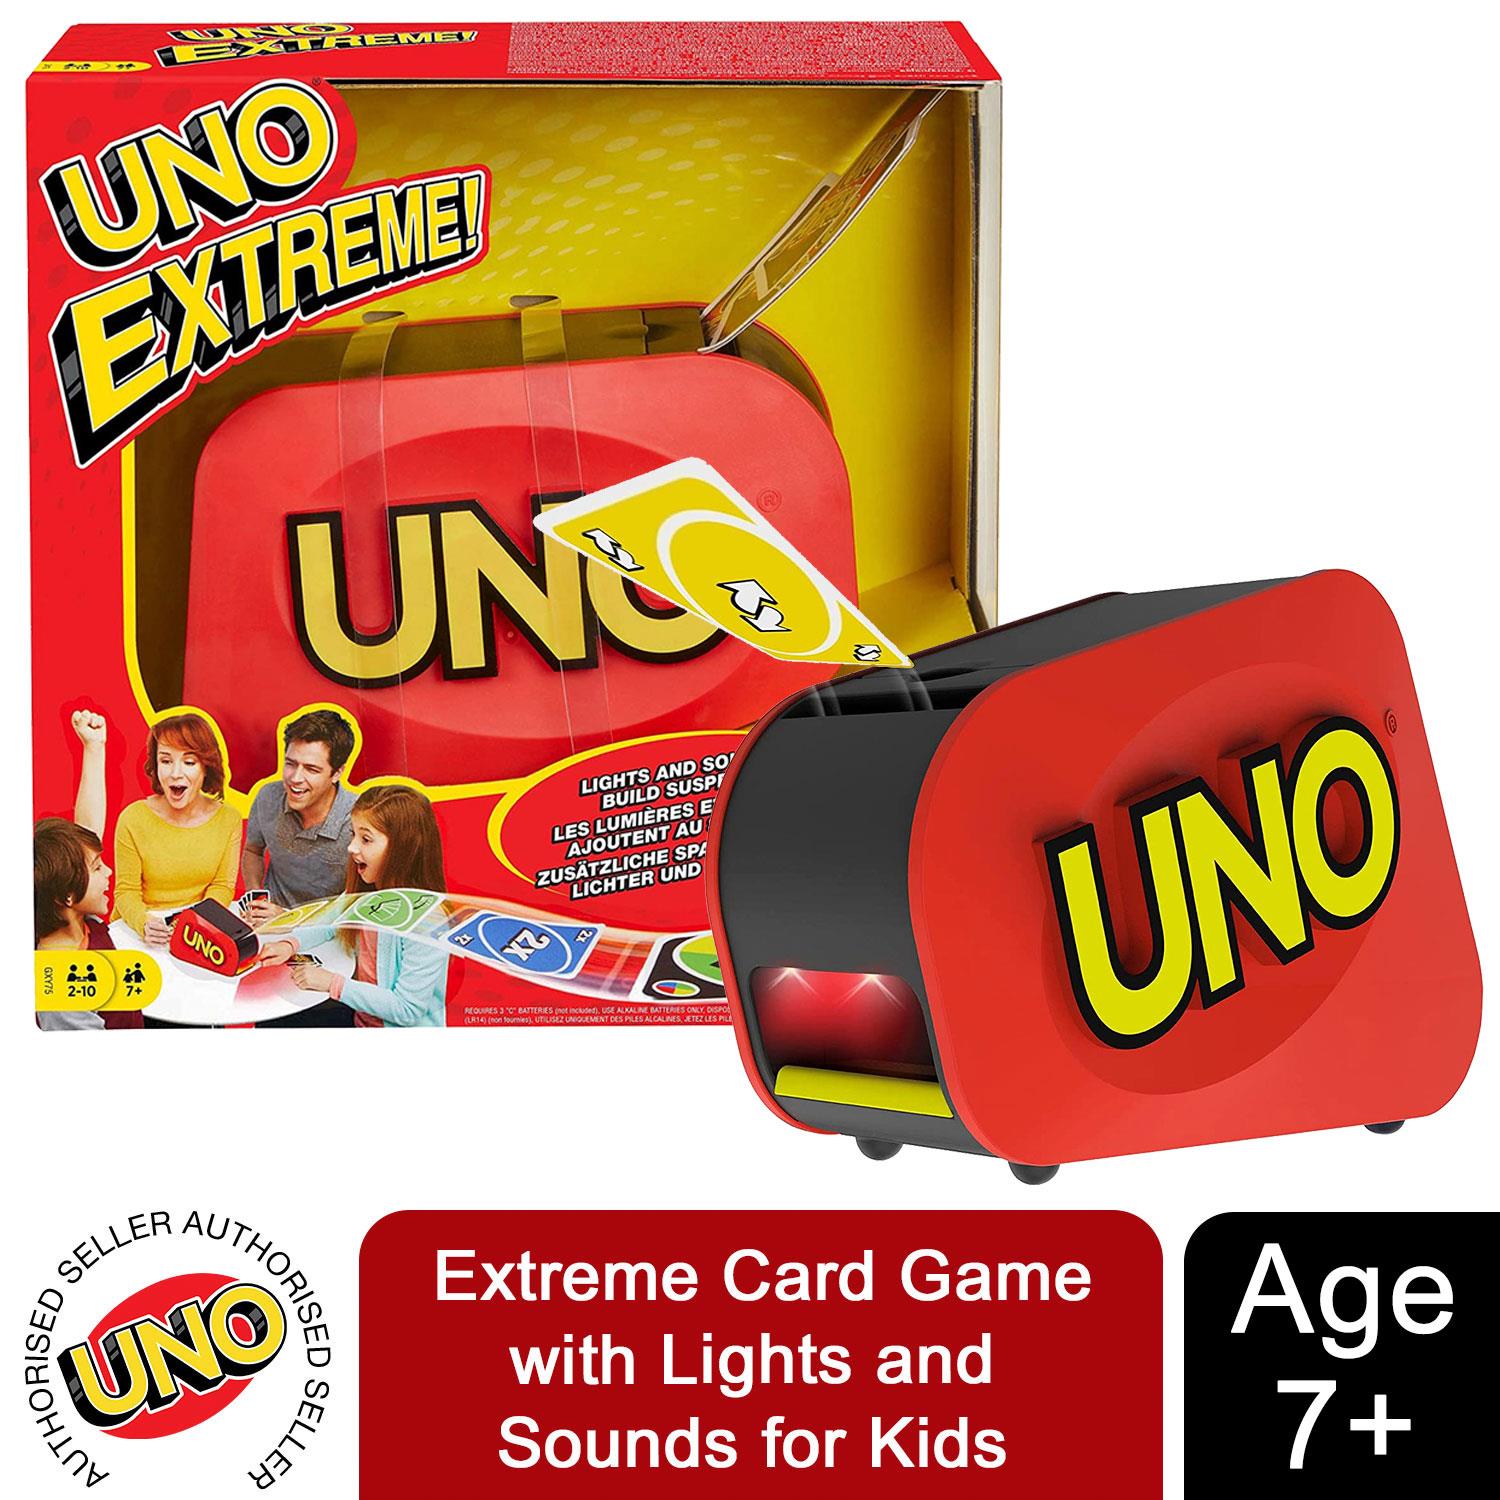 UNO Extreme Card Game with Lights and Sounds for Kids